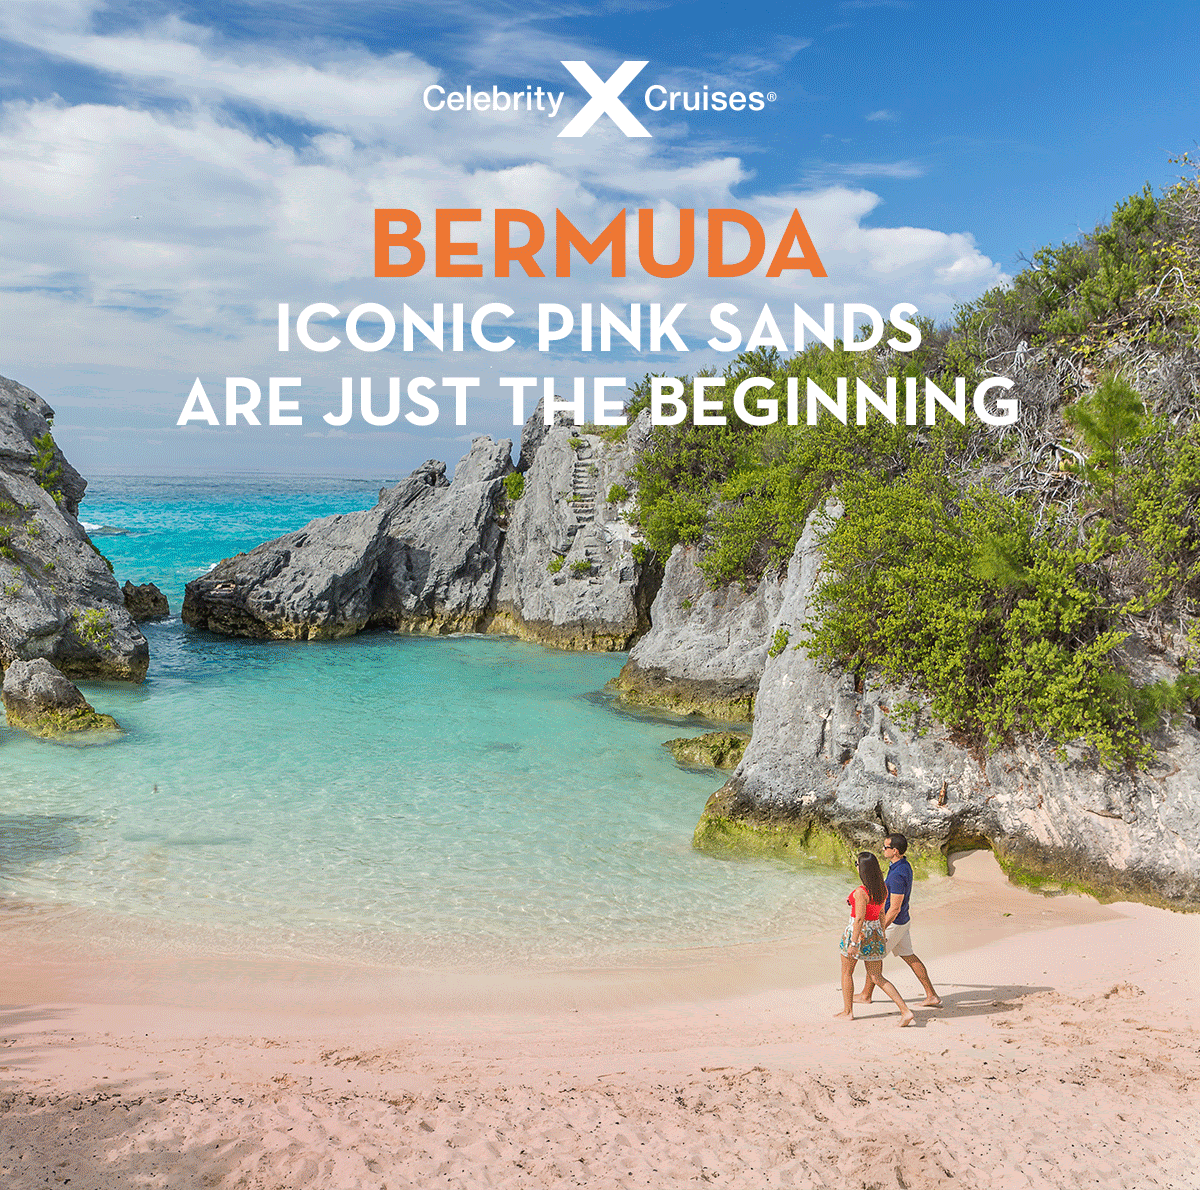 BERMUDA. ICONIC PINK SANDS. ARE JUST THE BEGINNING